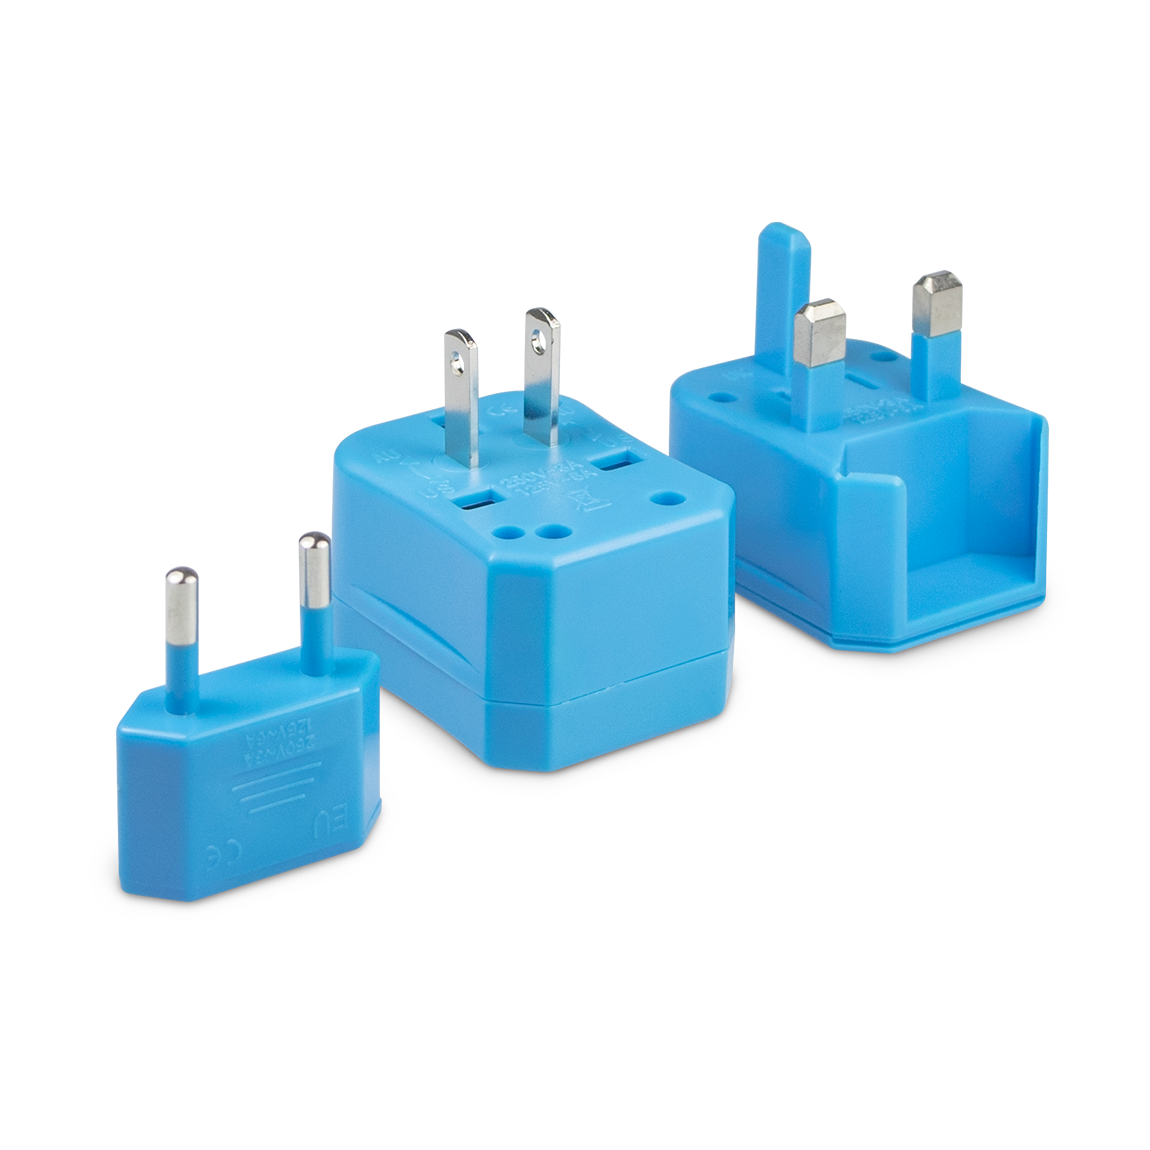 Three pieces of the universal travel adapter. This travel plug adapter is Blue. The World Traveler Travel Adapter is the perfect compact travel adapter to charge your tech on-the-go.